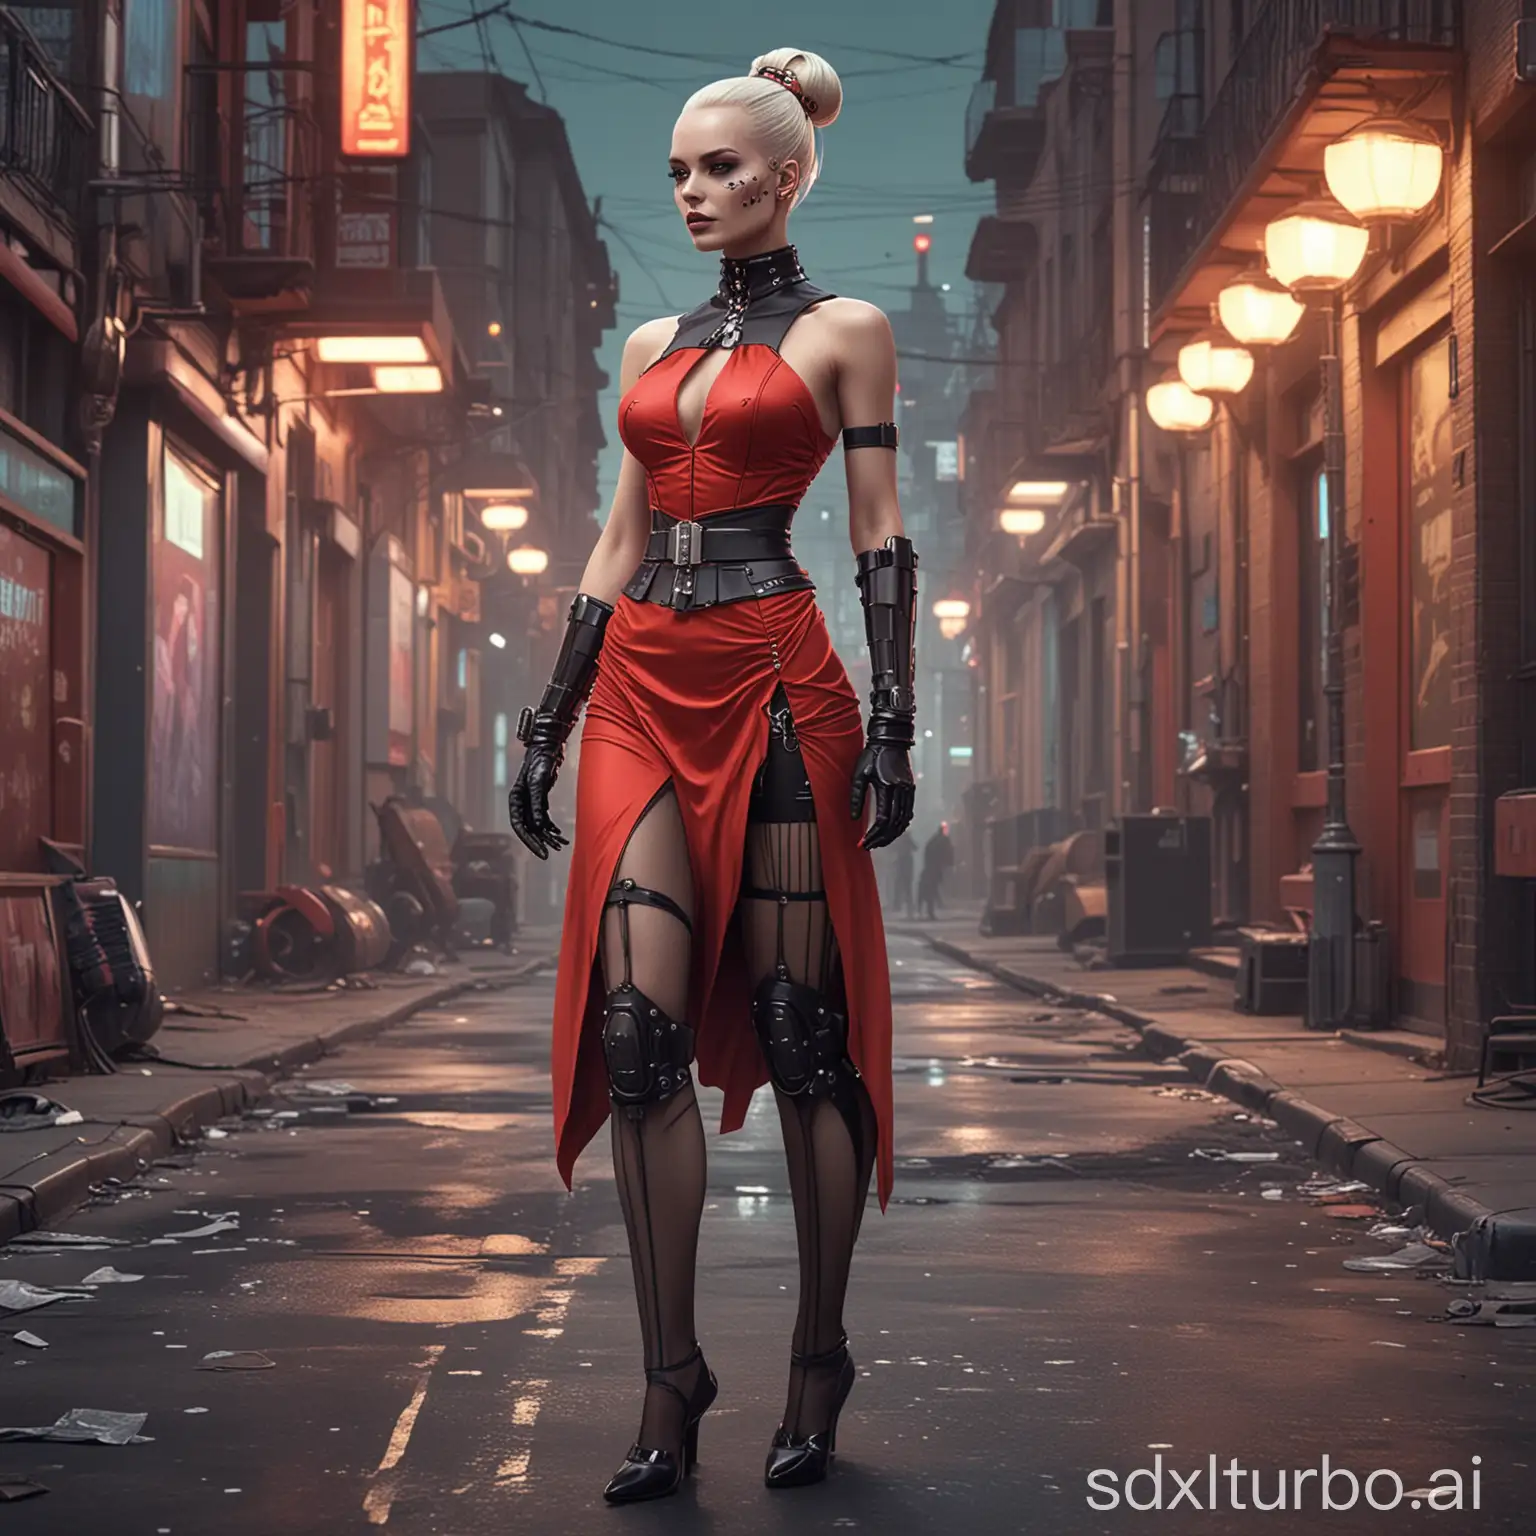 female lady android character, masterpiece coloured illustration, retro futuristic style, highly detailed. full body unfold sci-fi scarlet evening dress, belt with skull, fishnet stockings, One tall ponytail on bald head. walking down the street, retro futuristic city street at the background